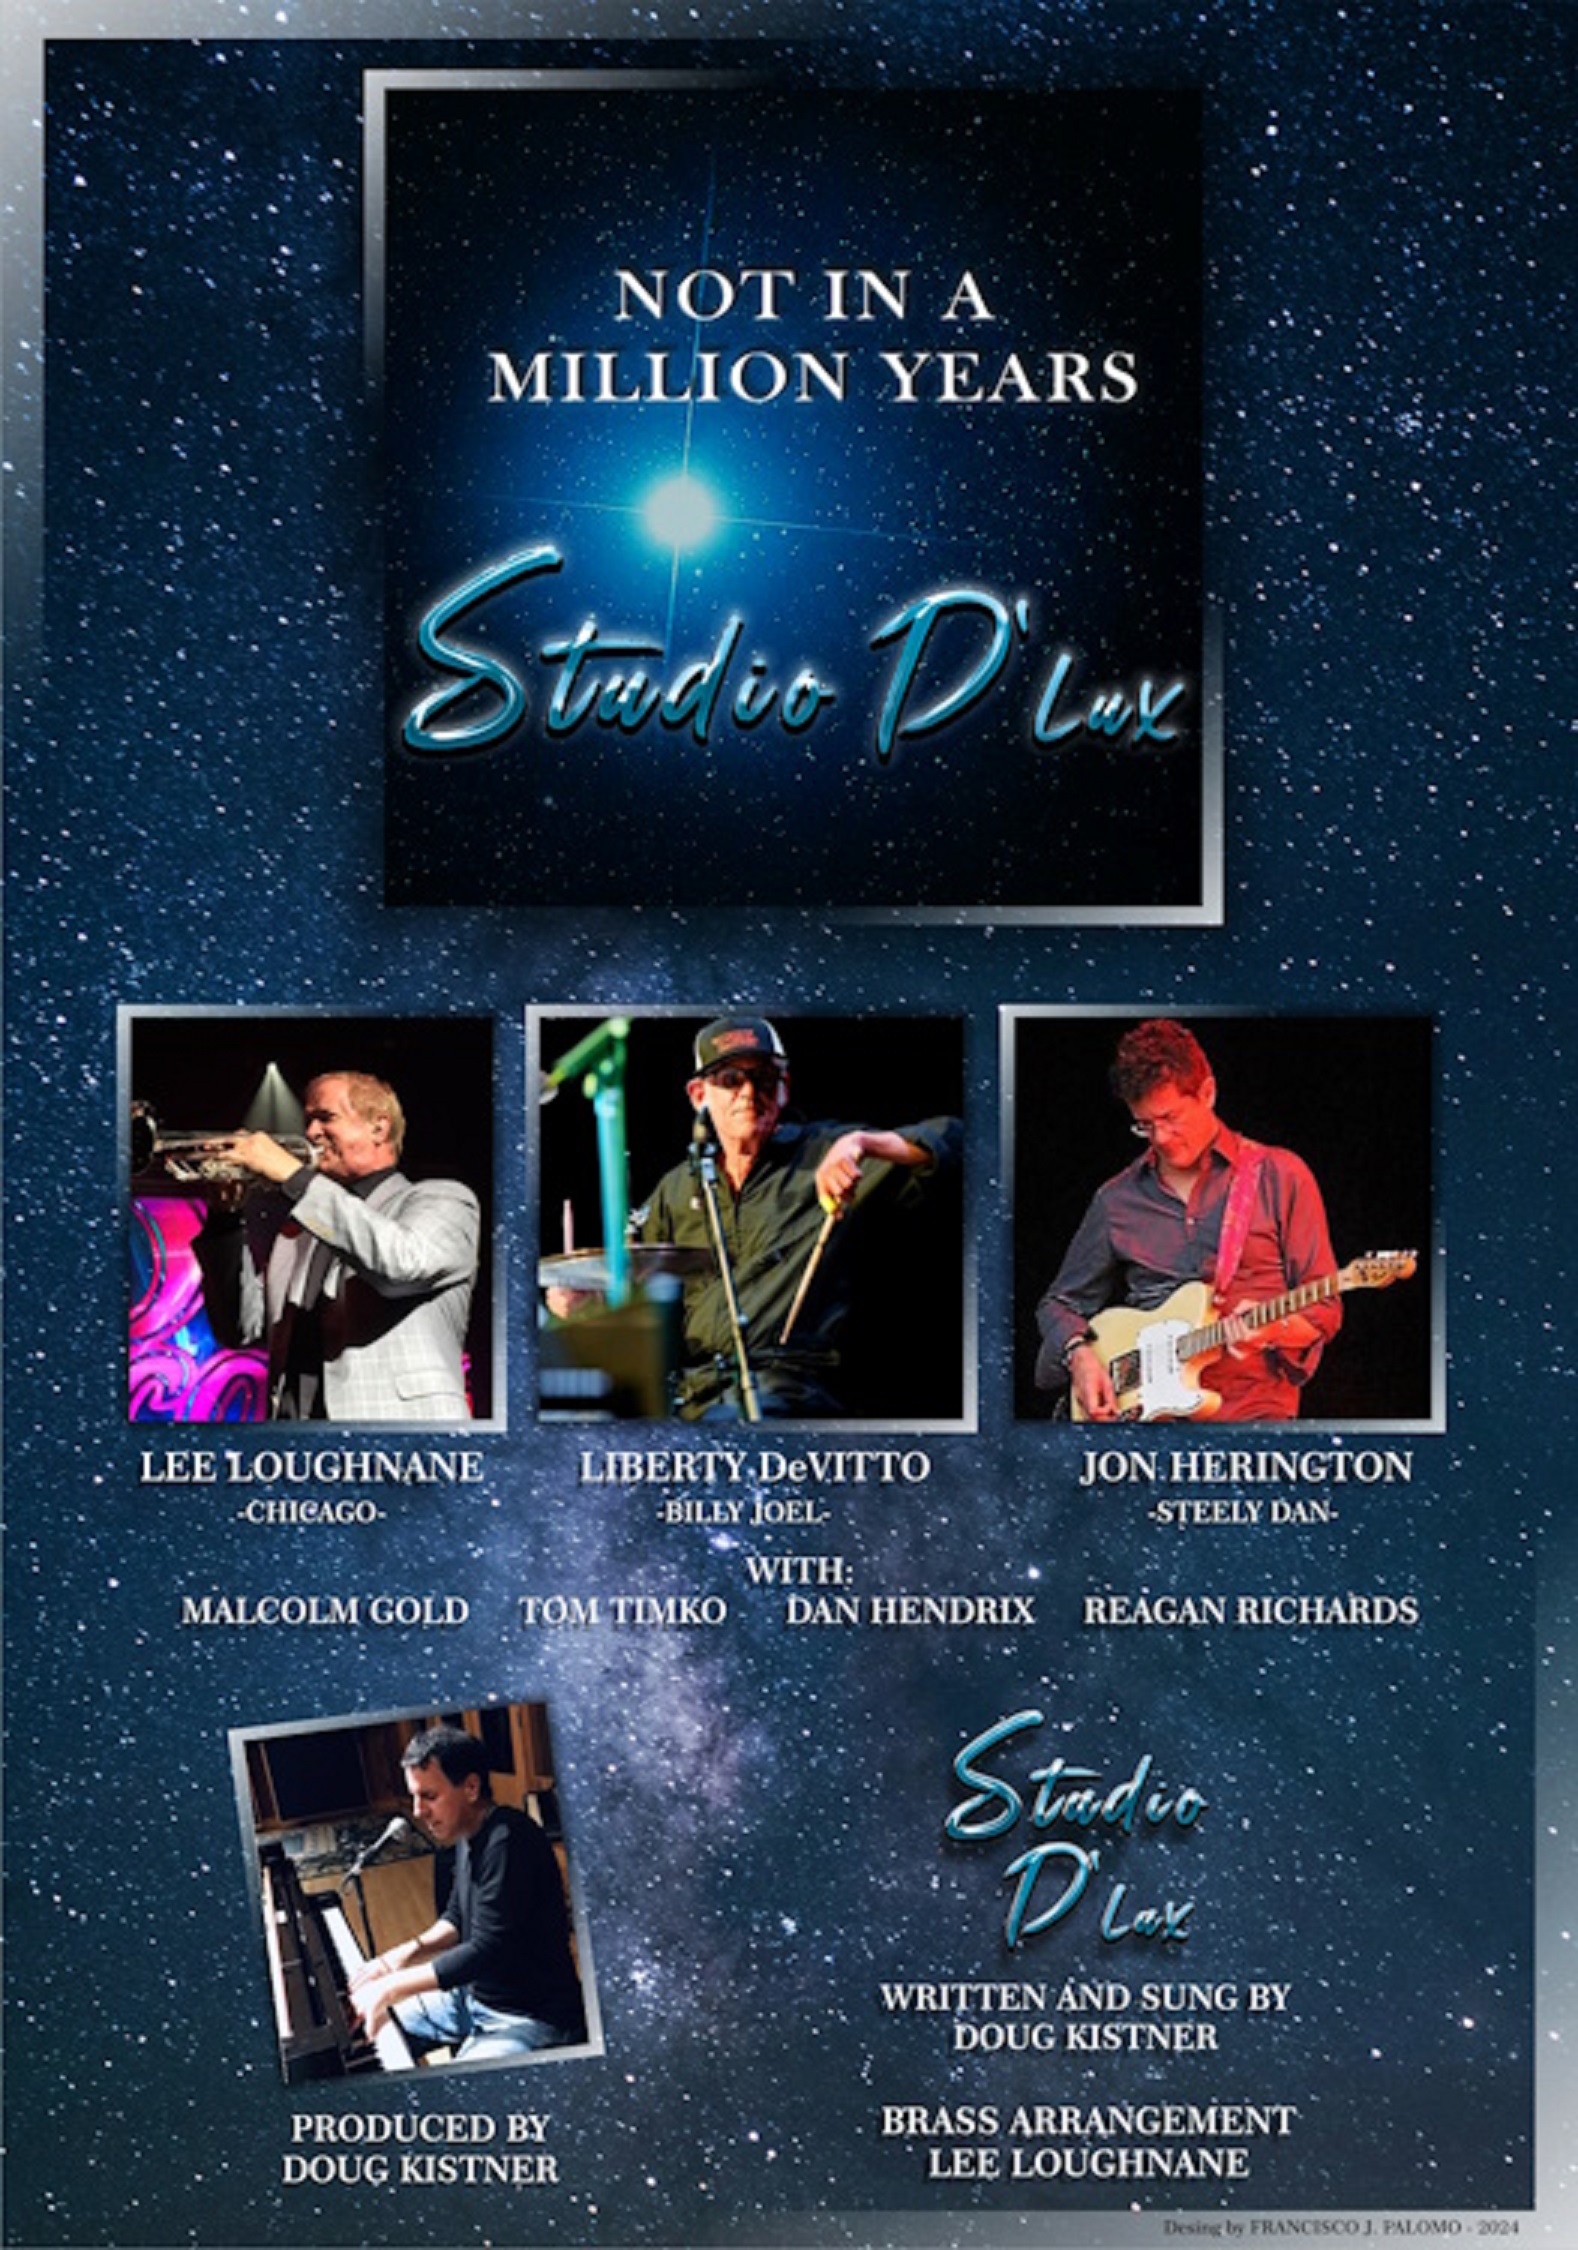 Allstar Project Studio D’lux To Release New Single “Not in a Million Years” Featuring Members From Chicago, Steely Dan & Billy Joel